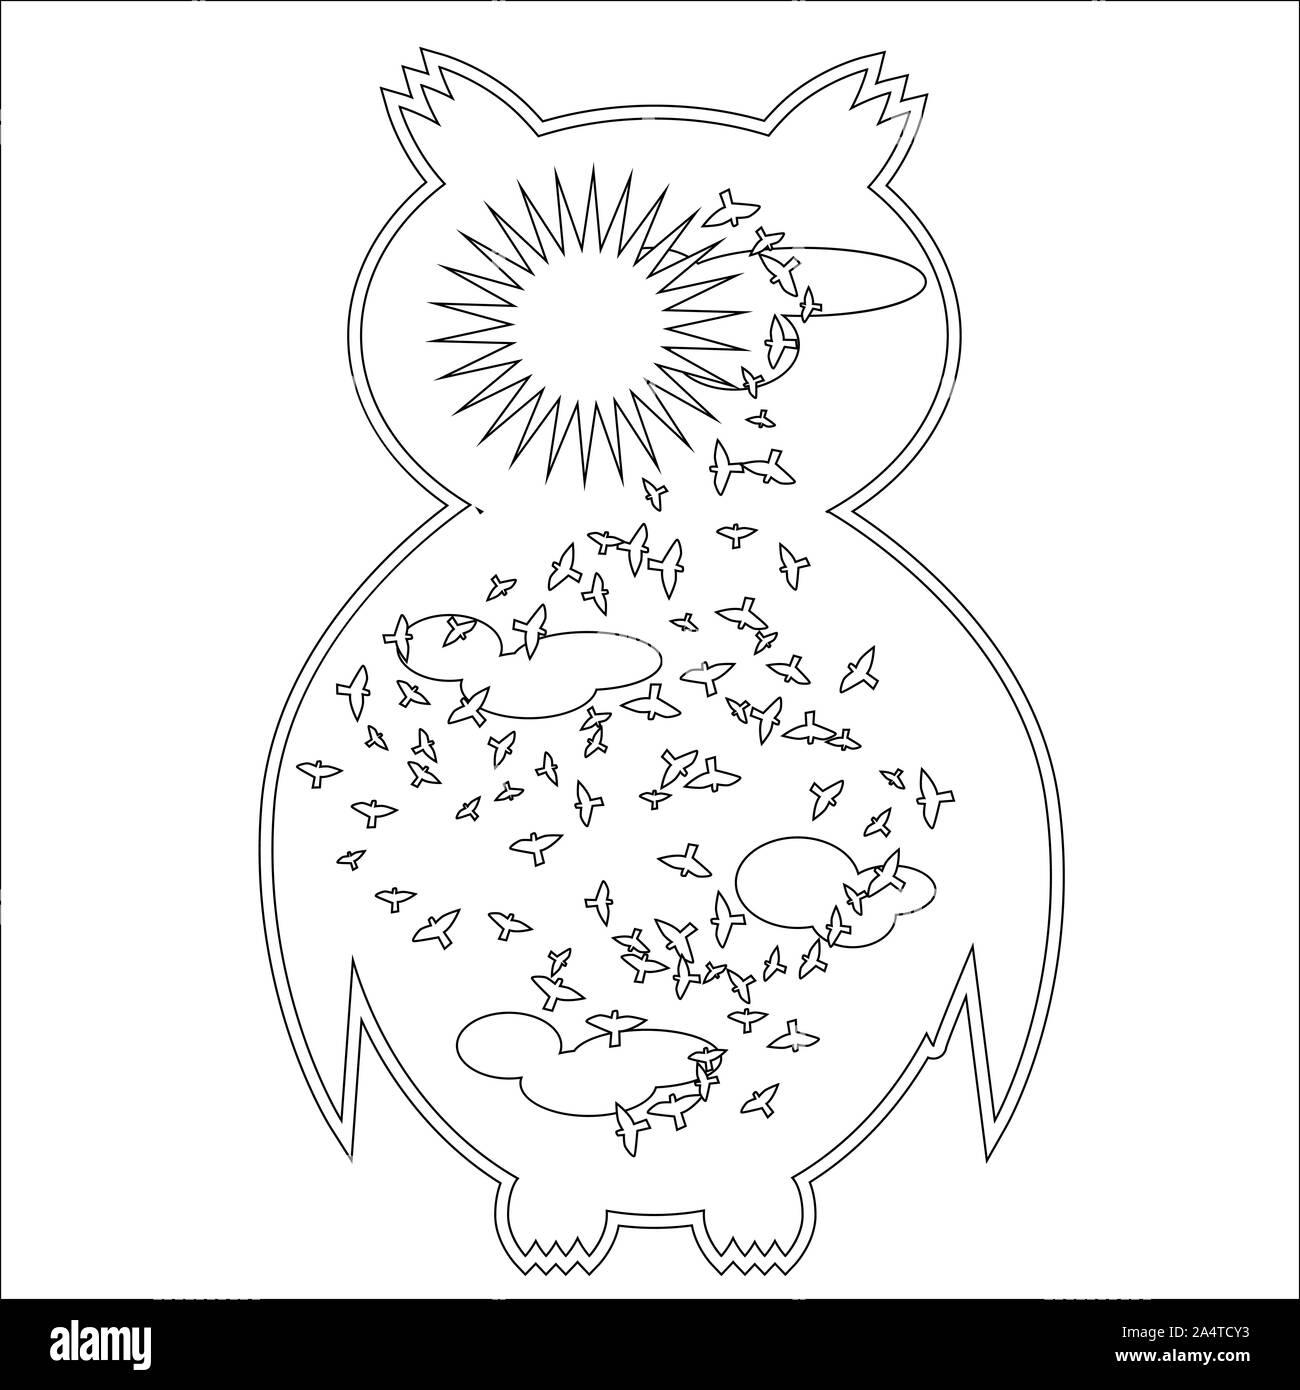 Coloring page with symbol moon sun owl coloring book for adult antistress album wall mural art tattoo black and white outline illustration stock photo